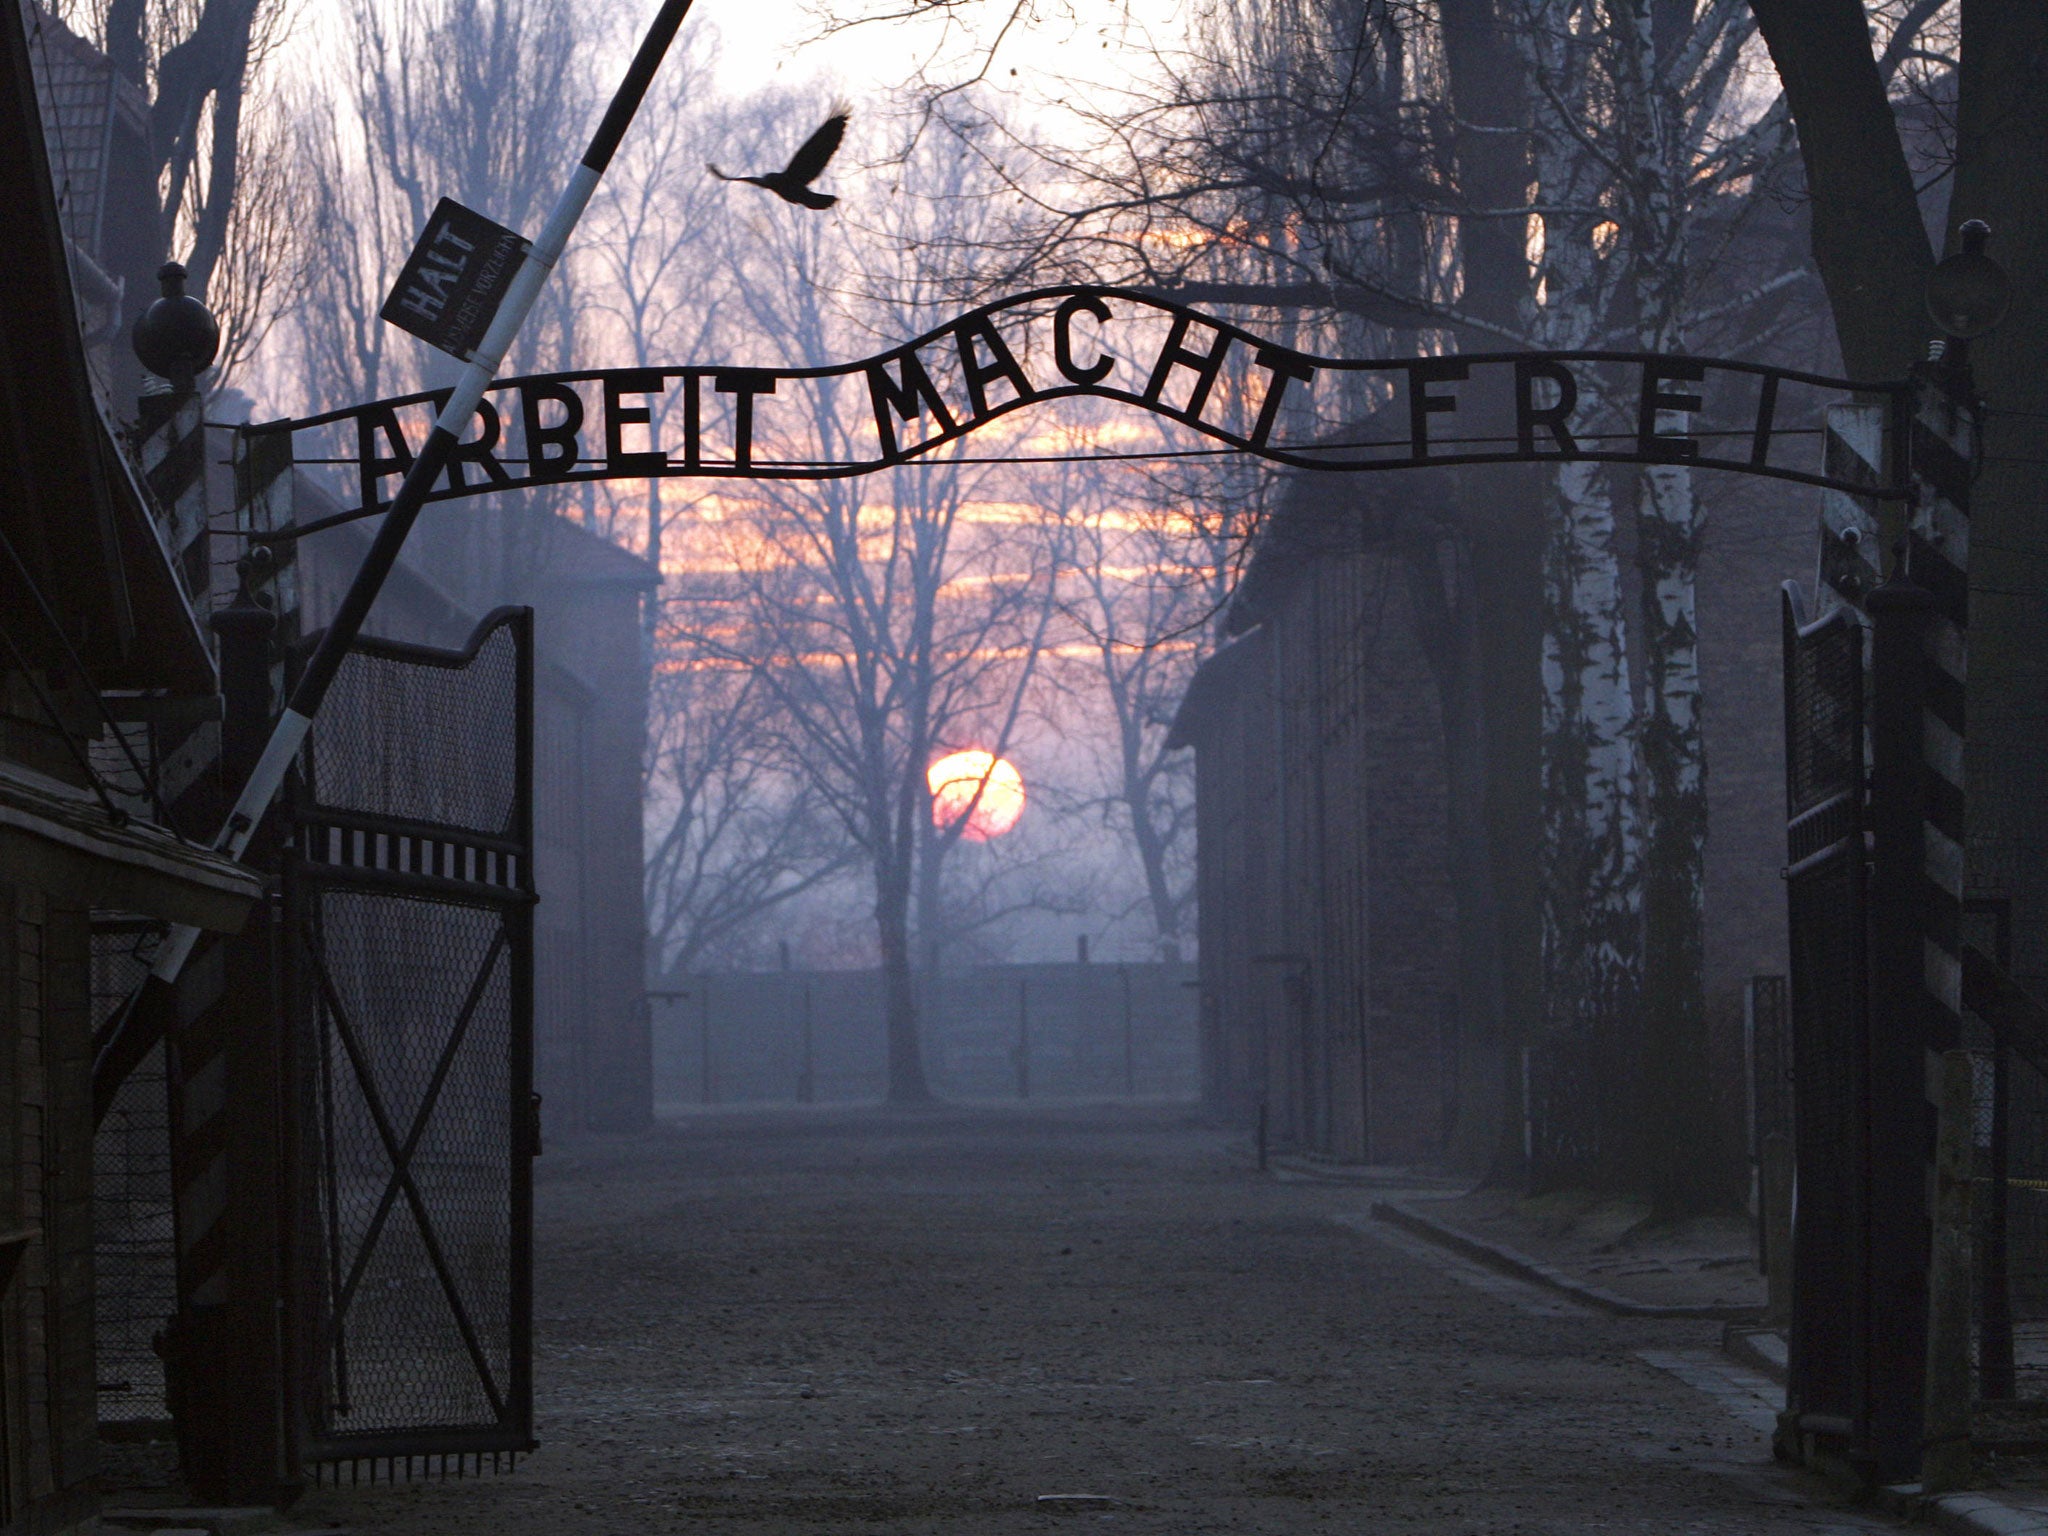 At least 1.1 million prisoners died at Auschwitz between 1942 and 1944